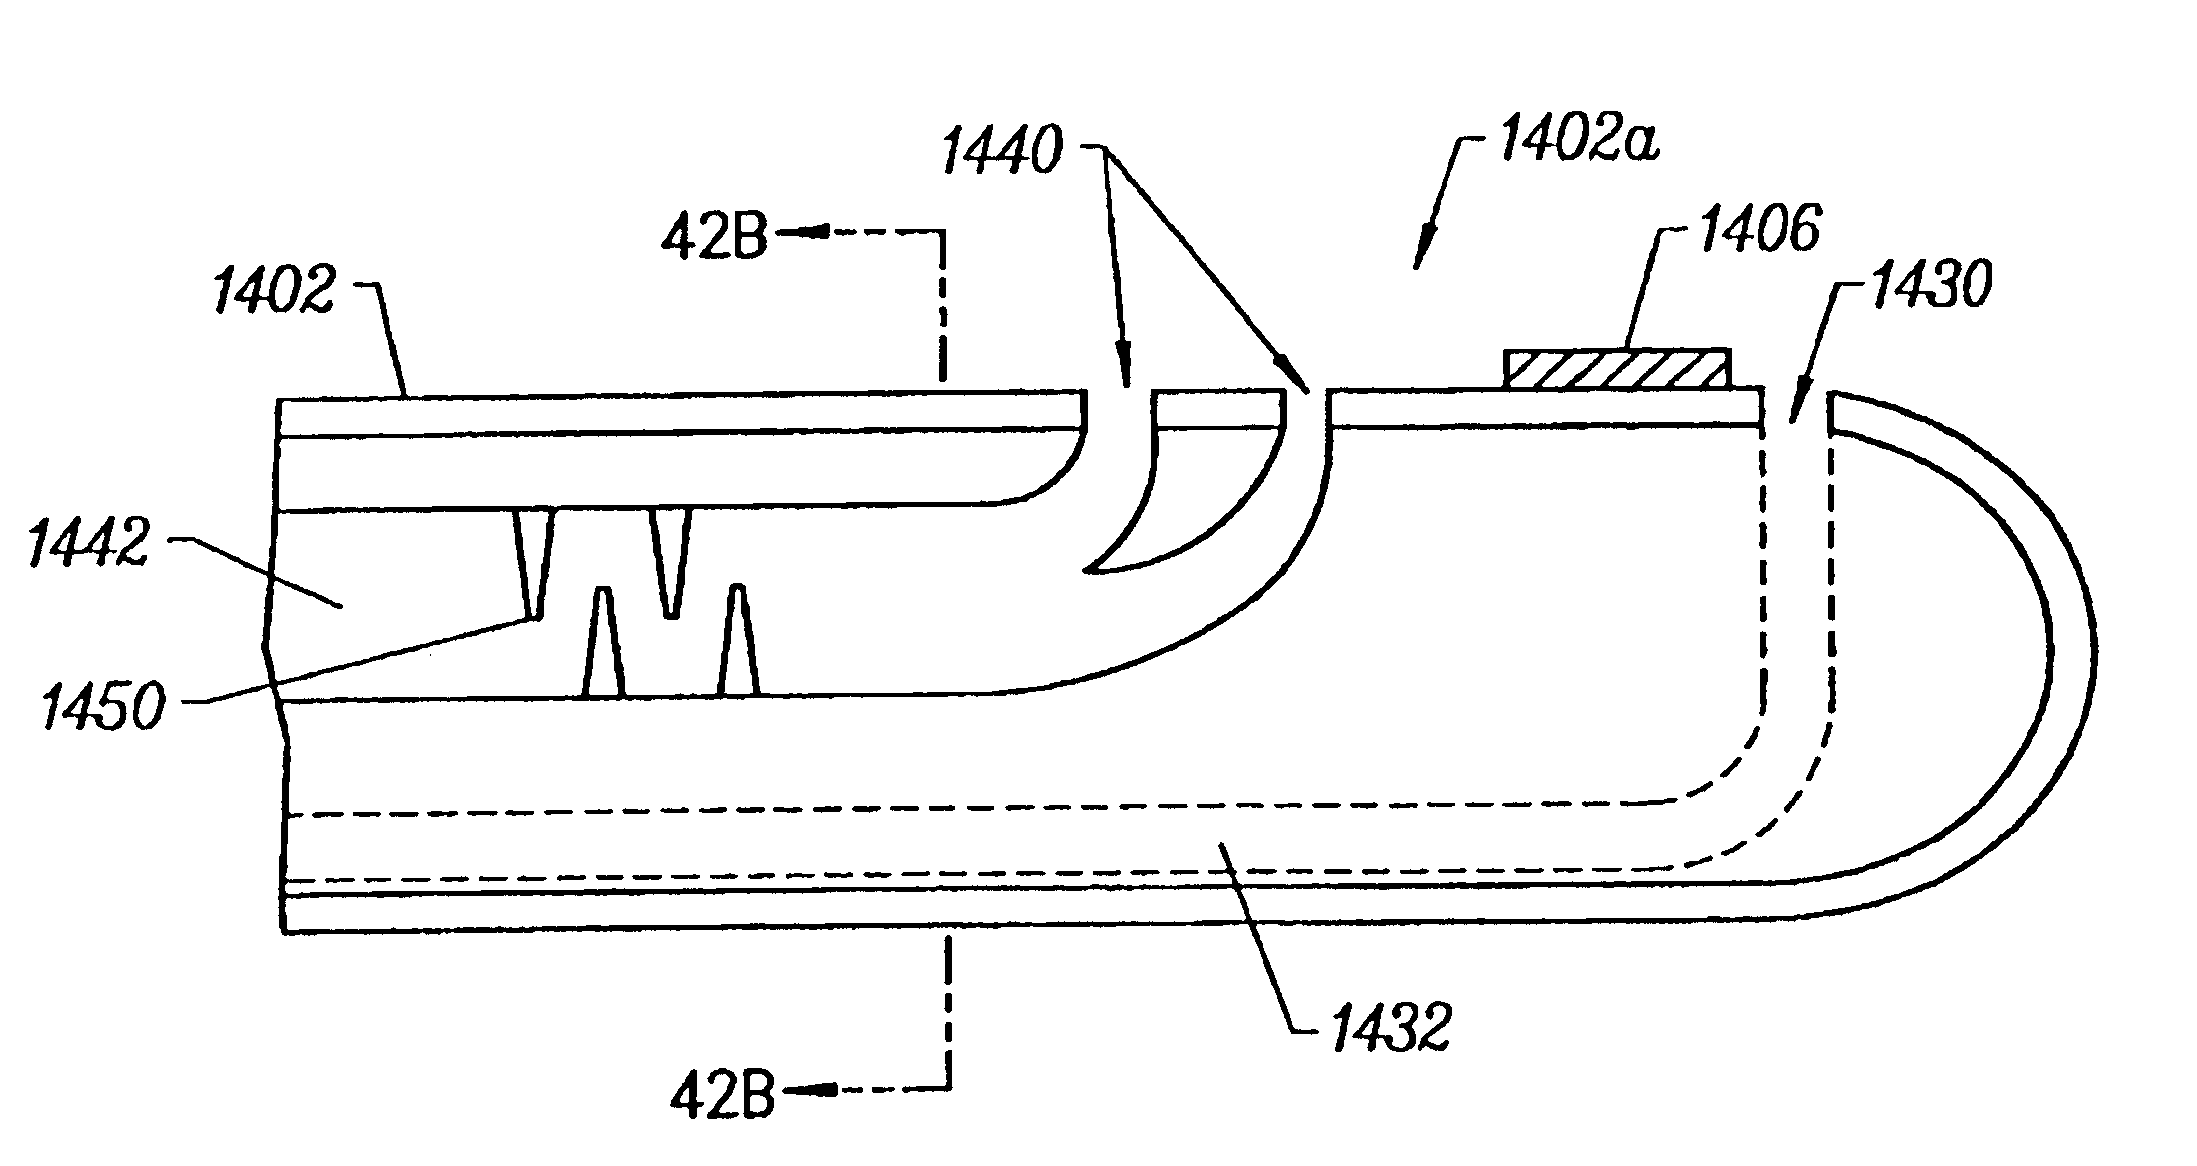 Electrosurgical apparatus having digestion electrode and methods related thereto